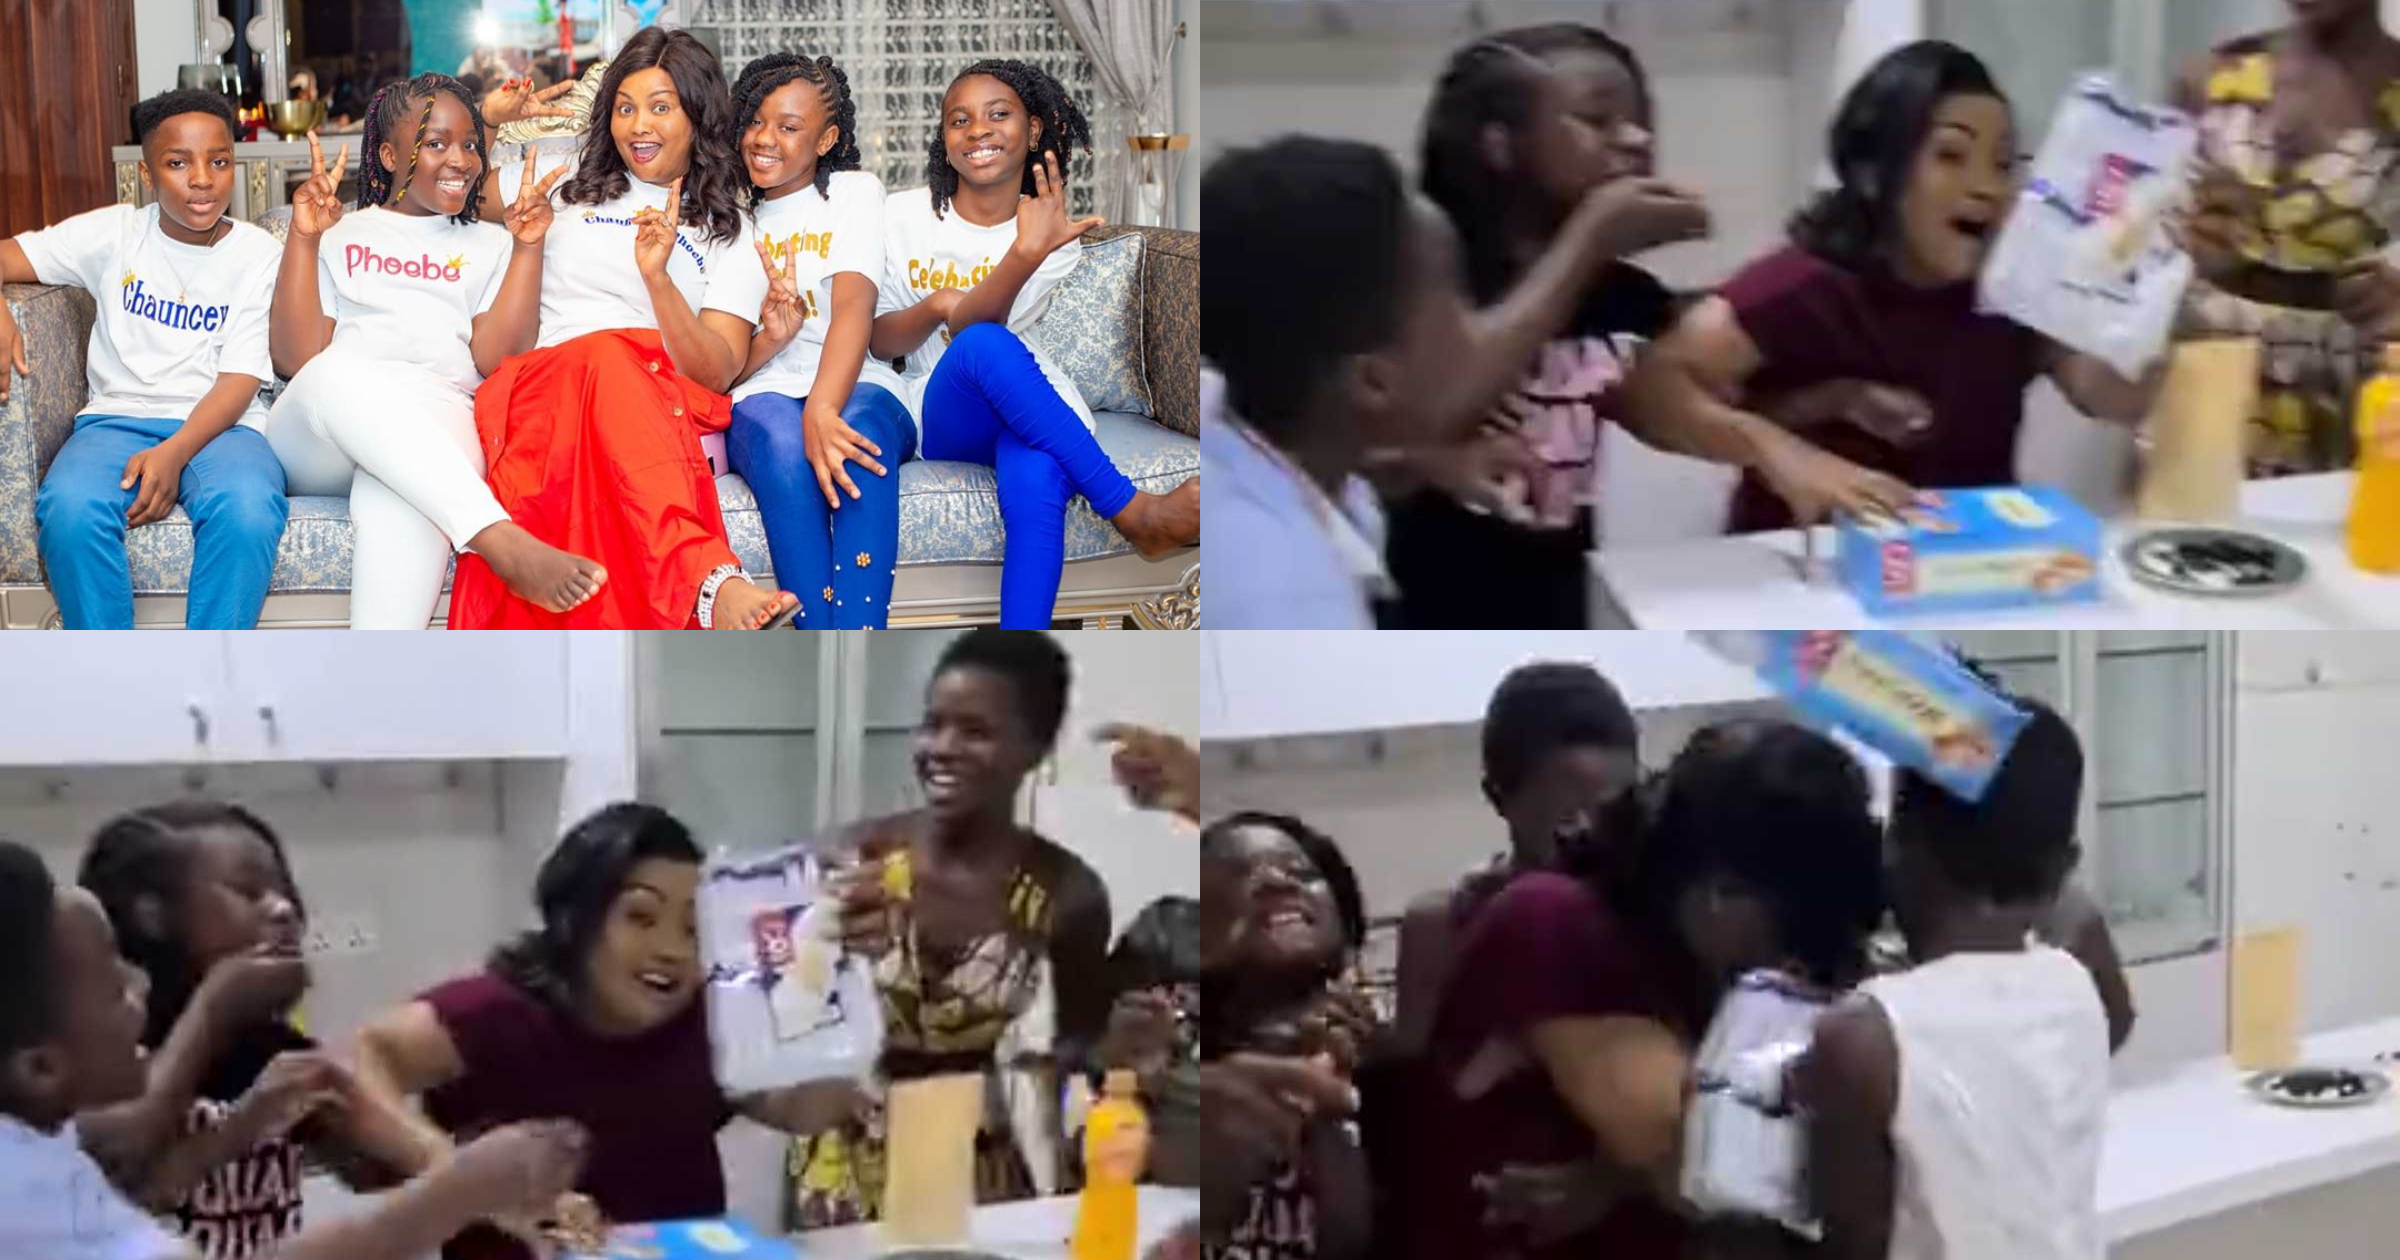 McBrown joins #dontleavemechallenge with her step-children, others (video)